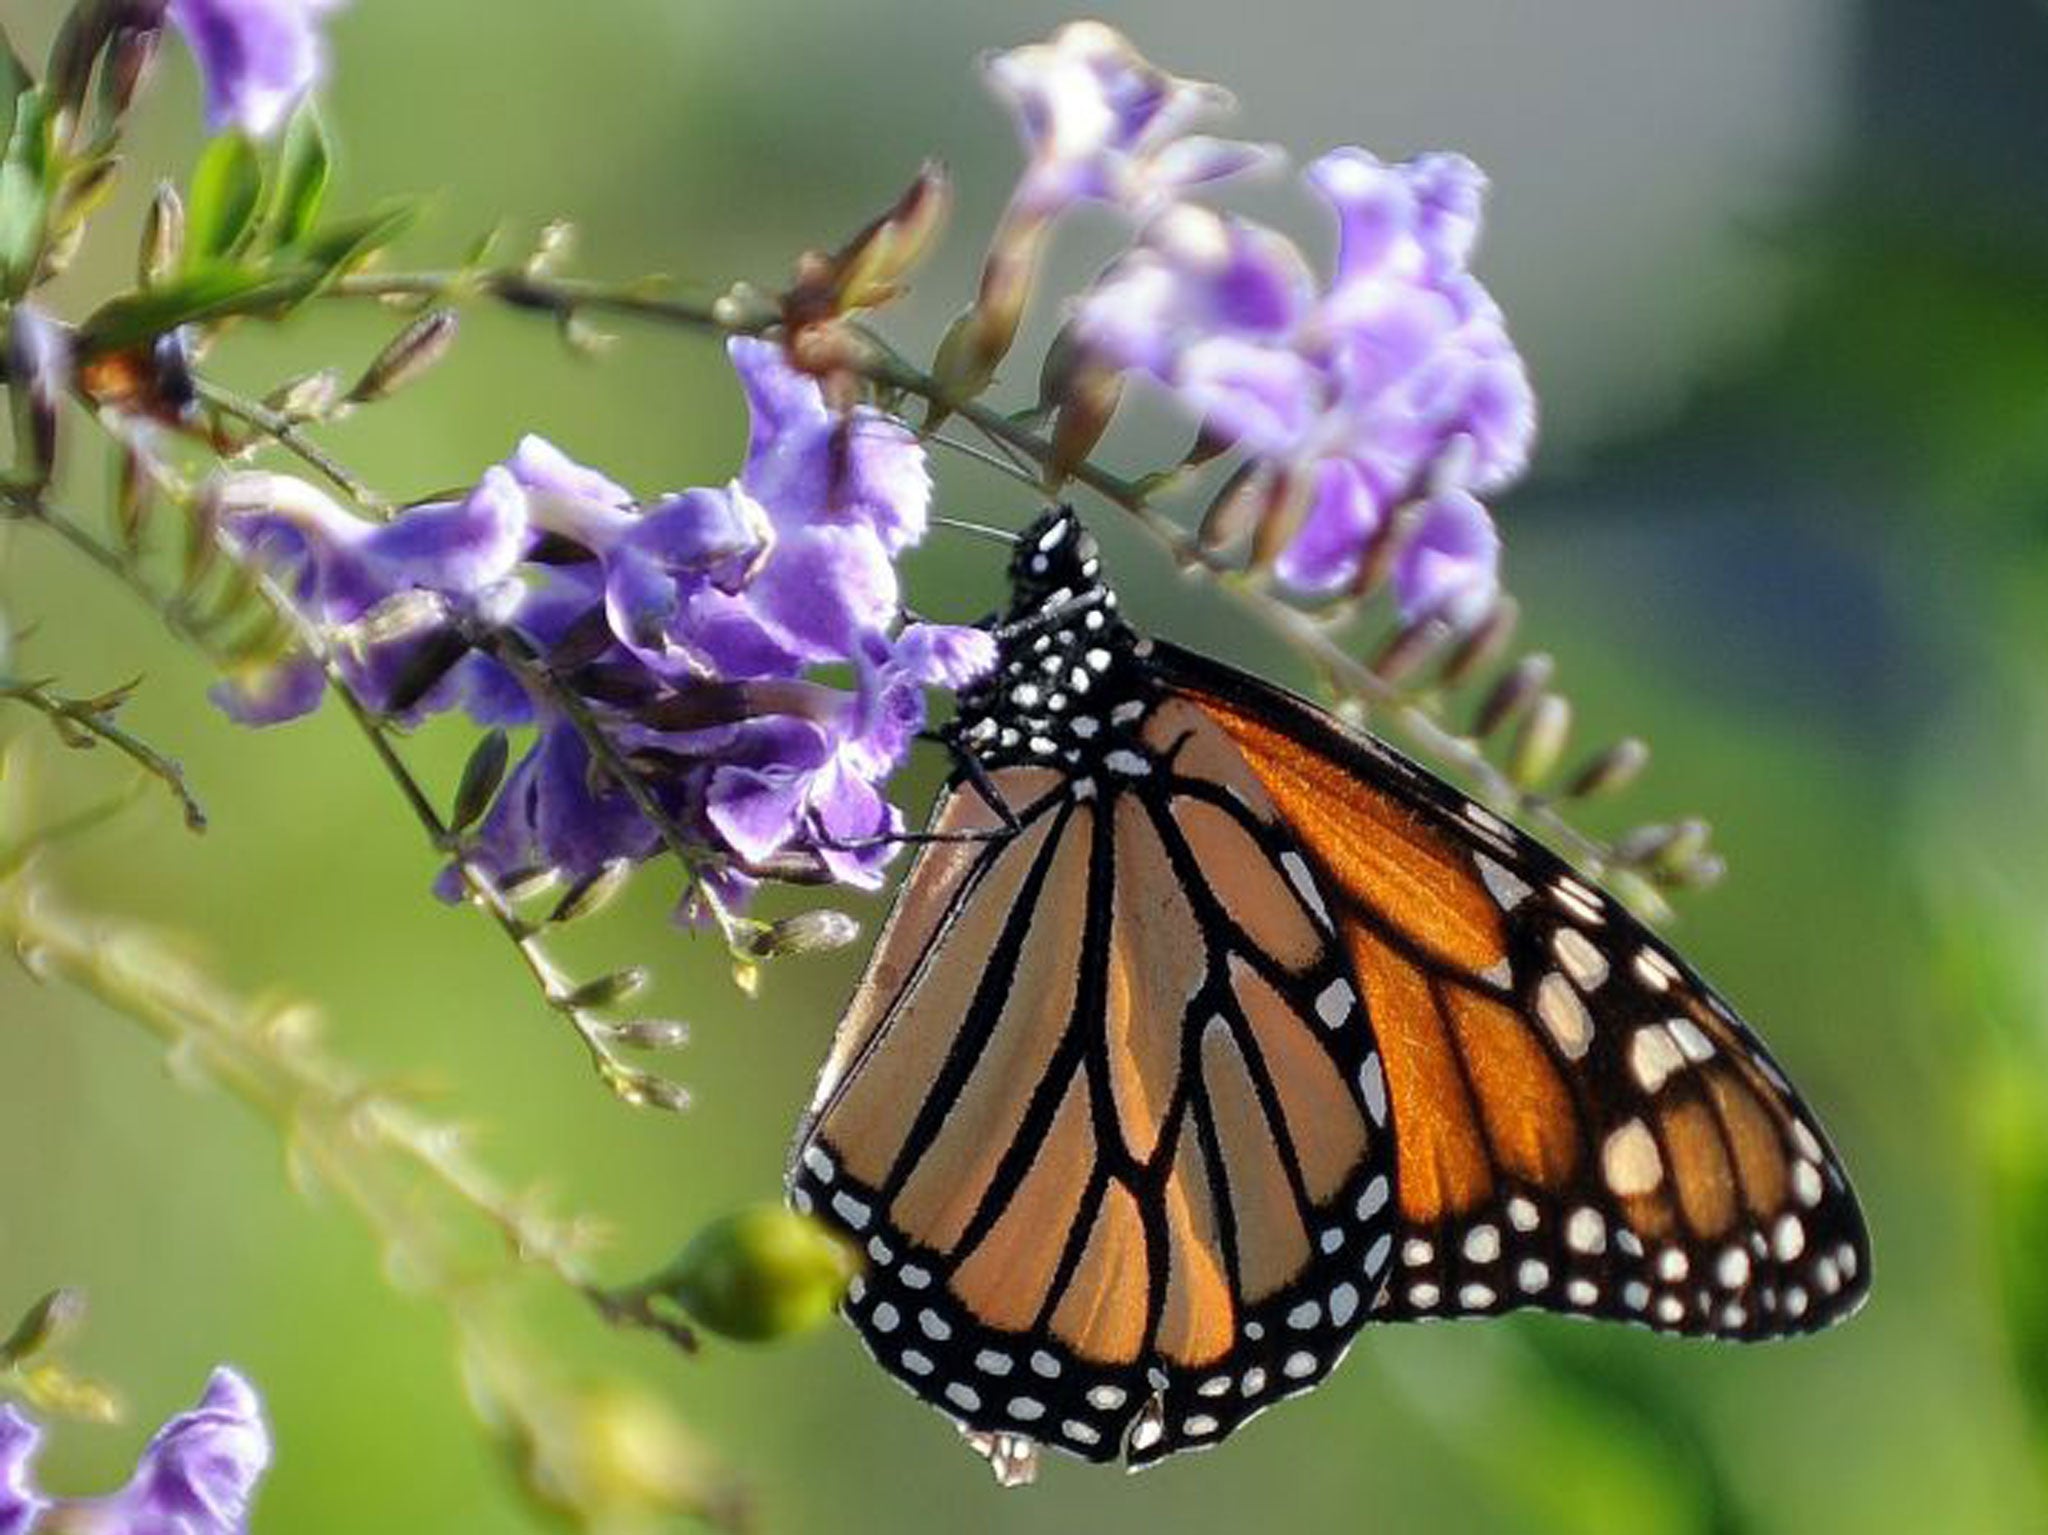 A Monarch butterfly is in a flower in Los Angeles, California on October 28, 2010. The Monarch is famous for its southward migration and northward return in summer in the Americas which spans the life of three to four generations of the butterfly.